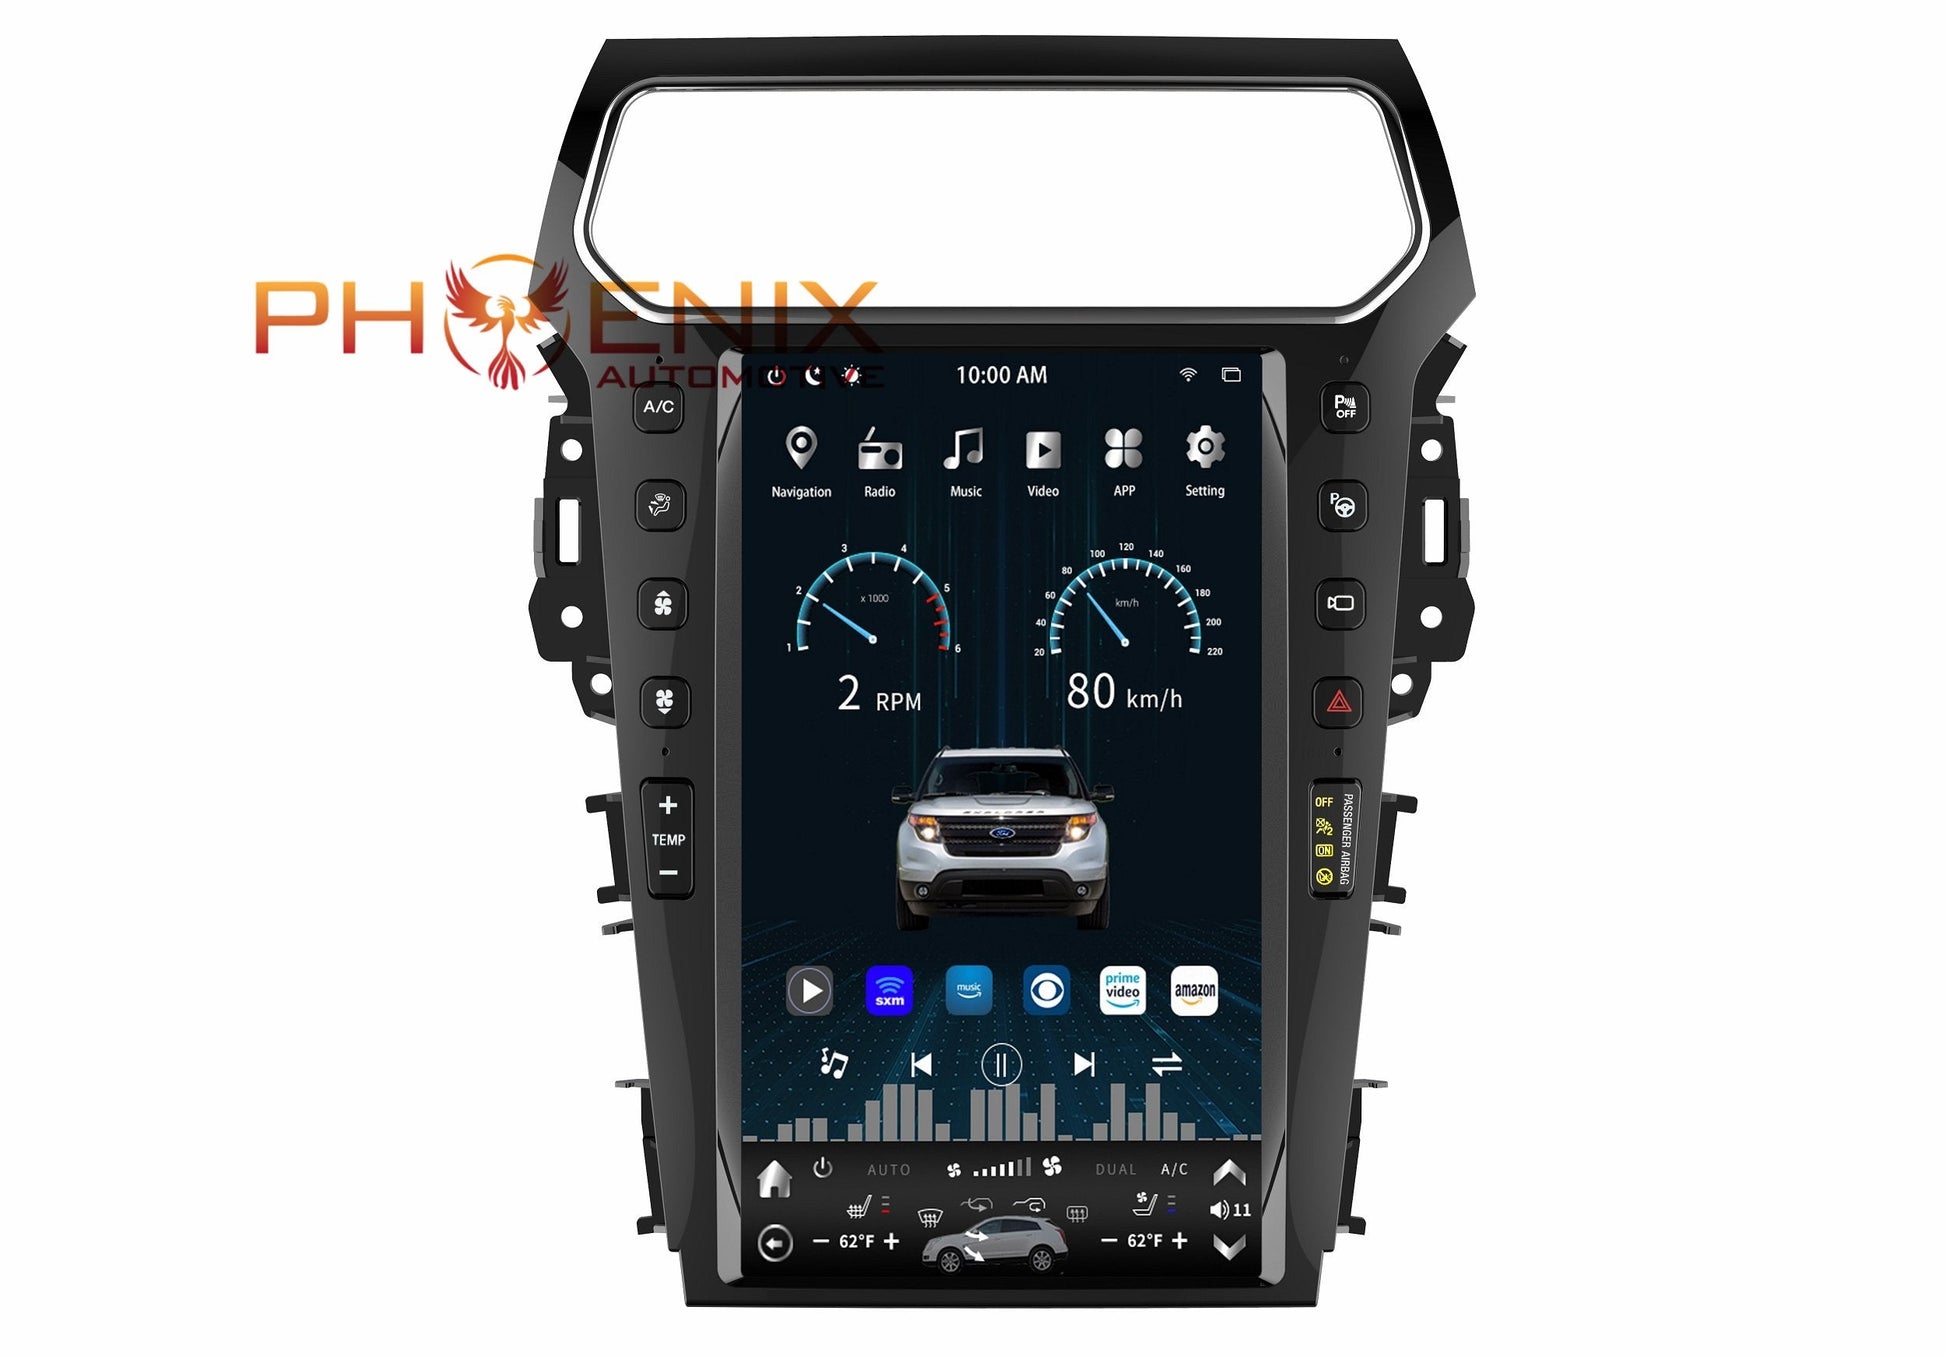 13.6" Android 9 Vertical Screen Navigation Radio for Ford Explorer 2011 - 2019 - Smart Car Stereo Radio Navigation | In-Dash audio/video players online - Phoenix Automotive